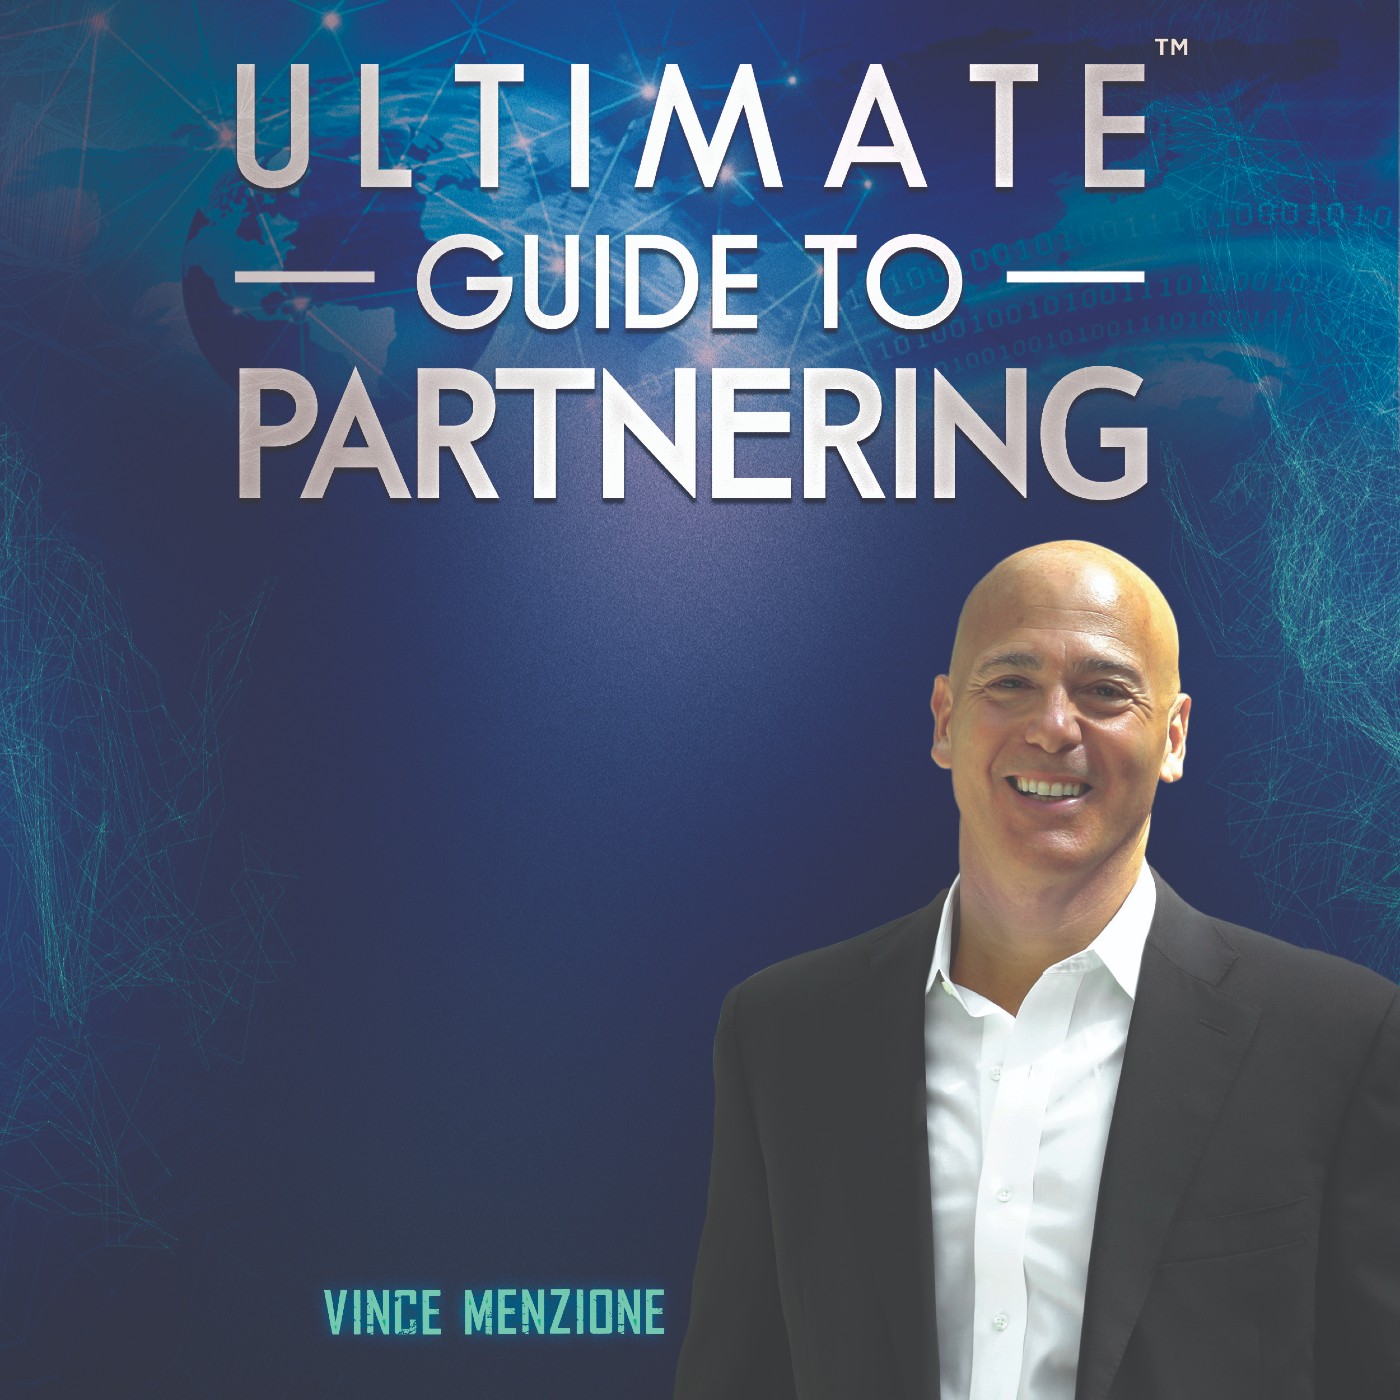 Ultimate Guide to Partnering™